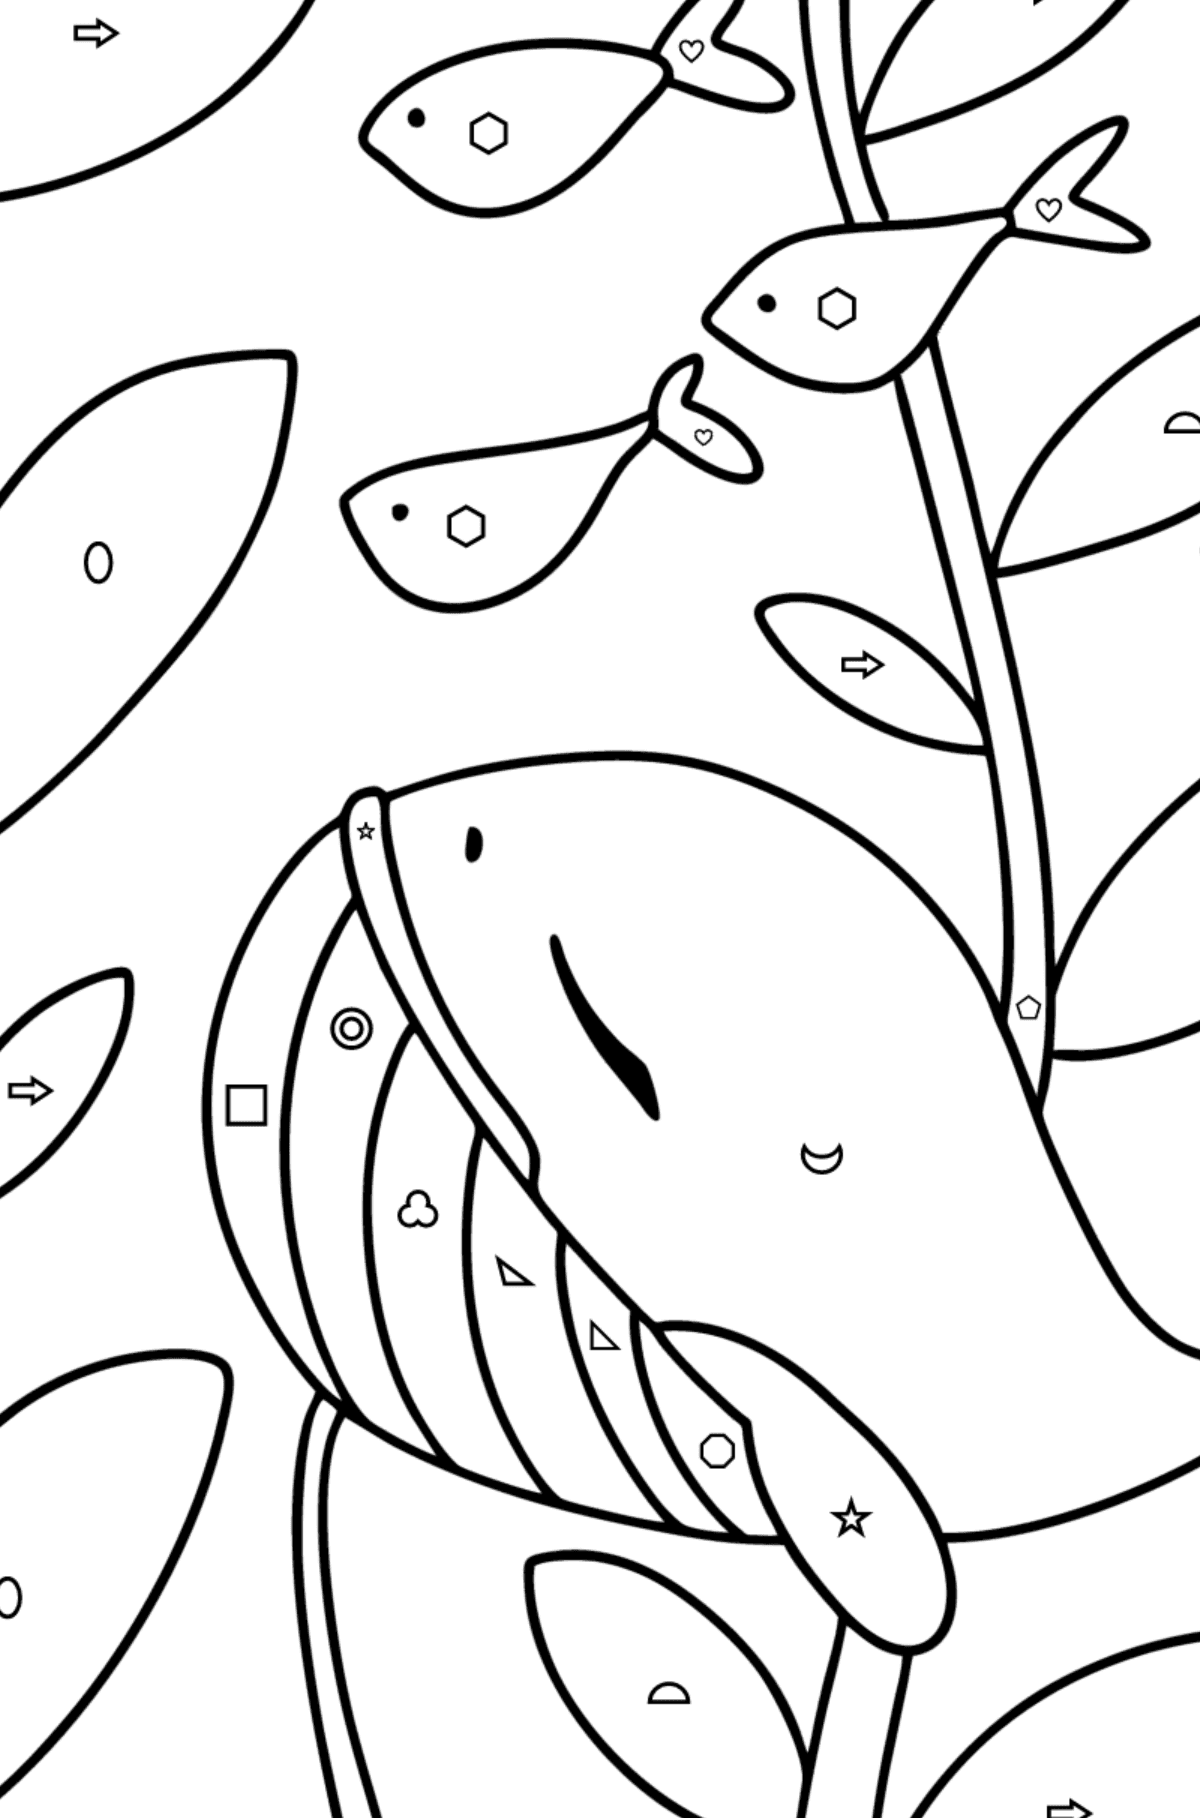 Whale baby coloring page - Coloring by Geometric Shapes for Kids